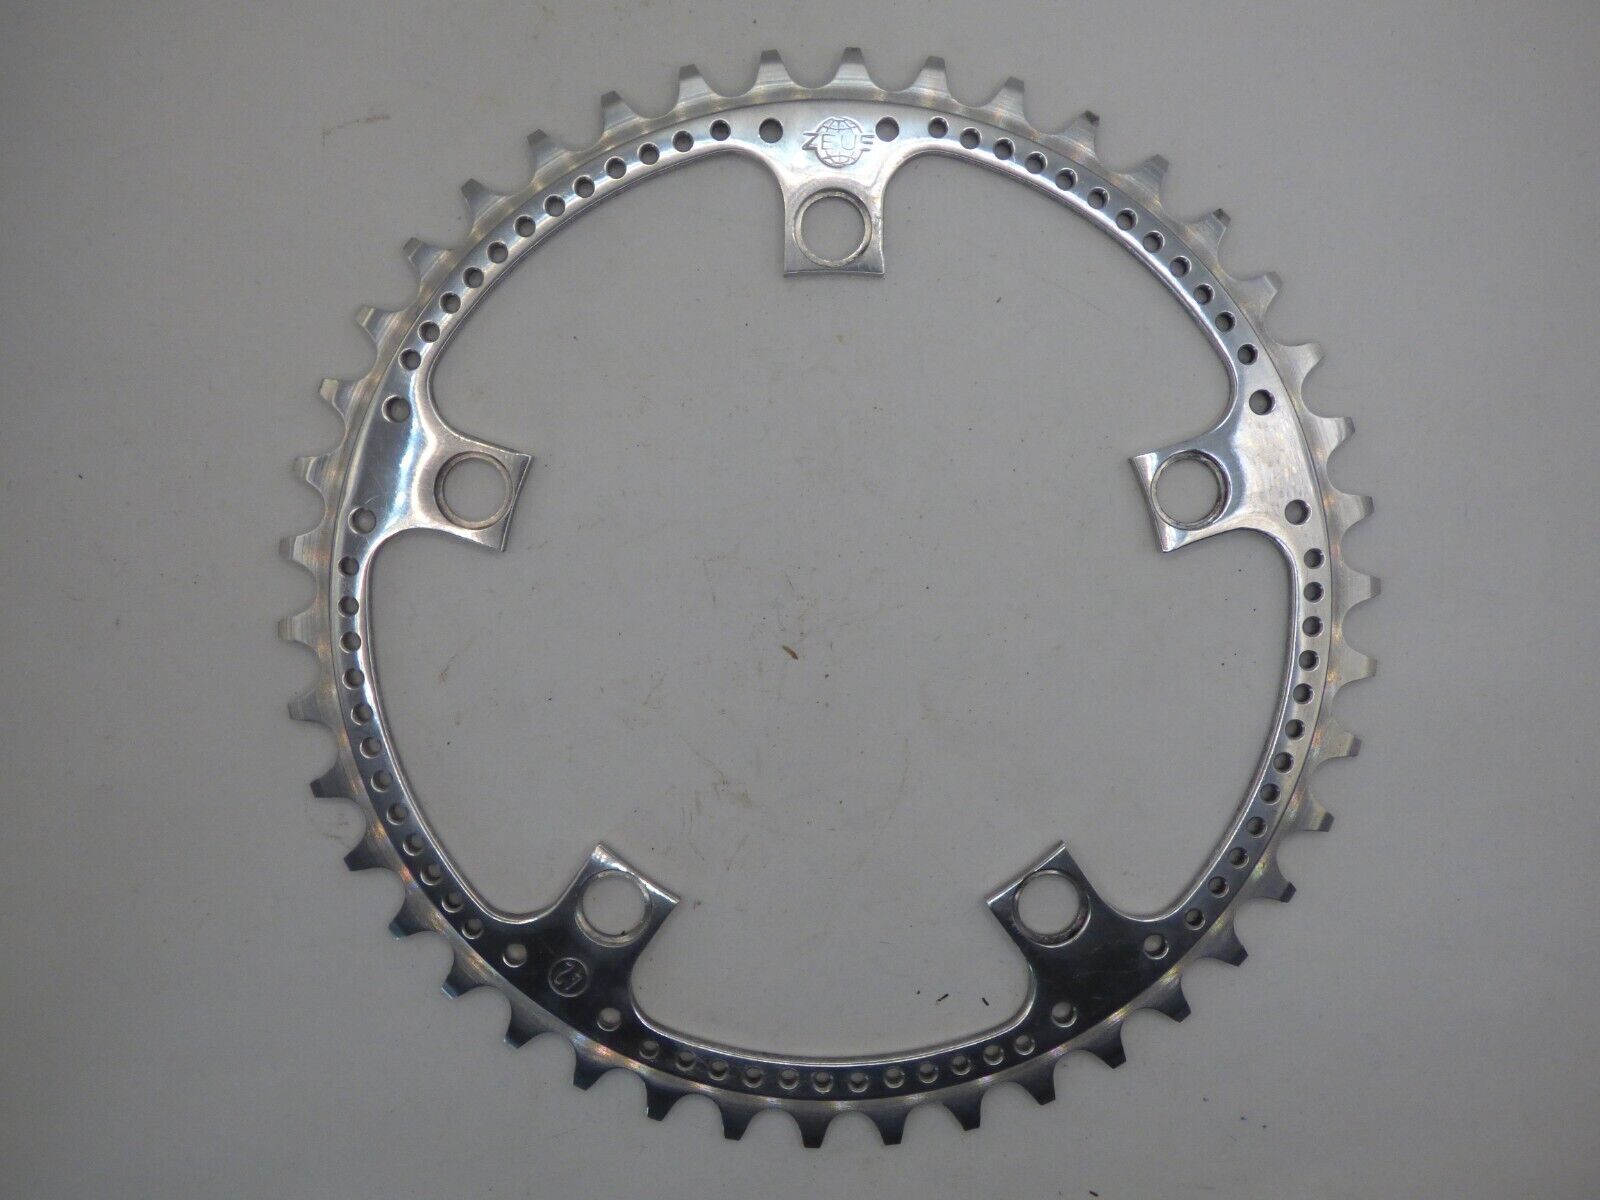 ZEUS 2000 DRILLED CHAINRING 42T - 119 BCD - NOS